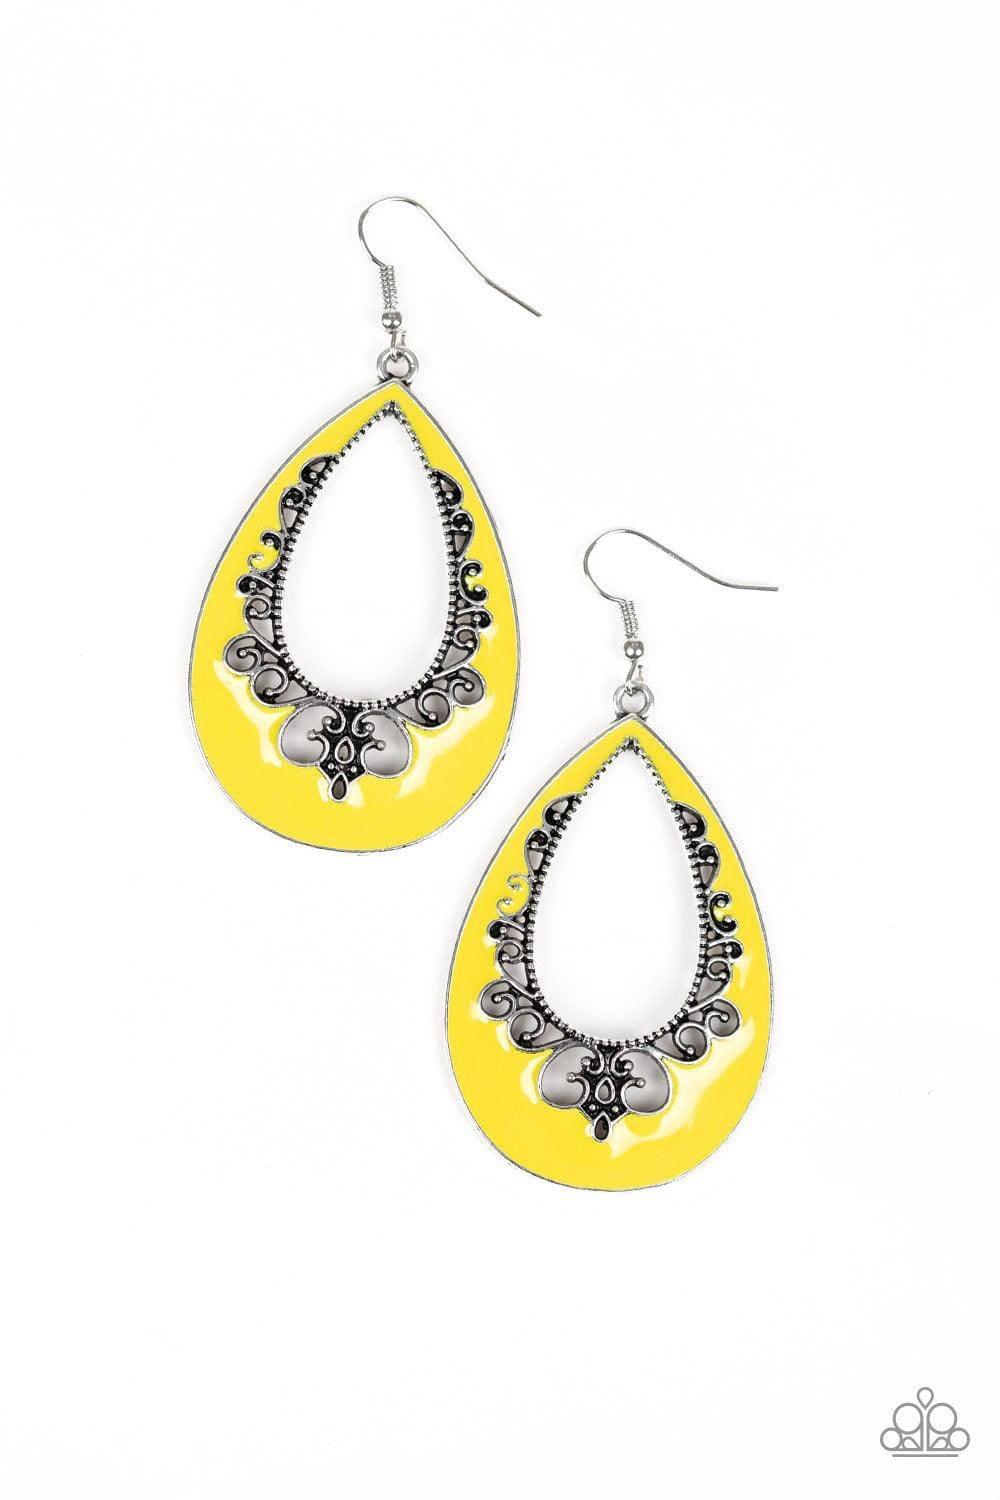 Paparazzi Accessories - Compliments To The Chic - Yellow Earrings - Bling by JessieK